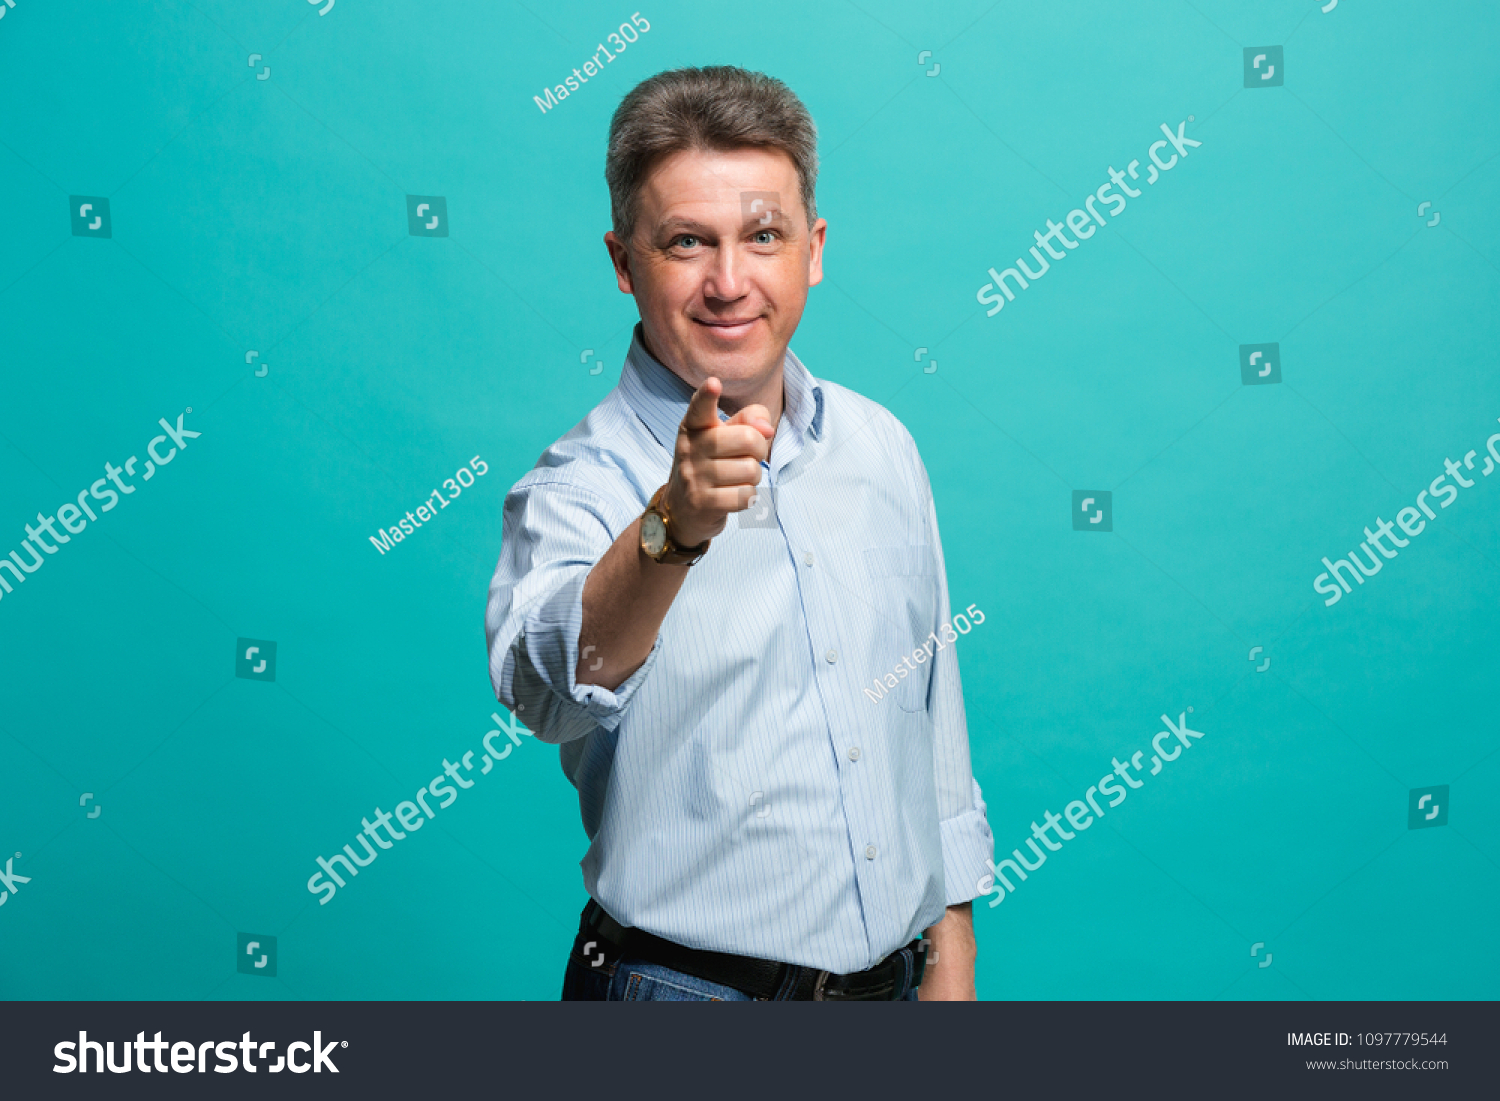 I choose you and order. The smiling business man point you, want you, half length closeup portrait on blue studio background. The human emotions, facial expression concept. Front view. Trendy colors #1097779544